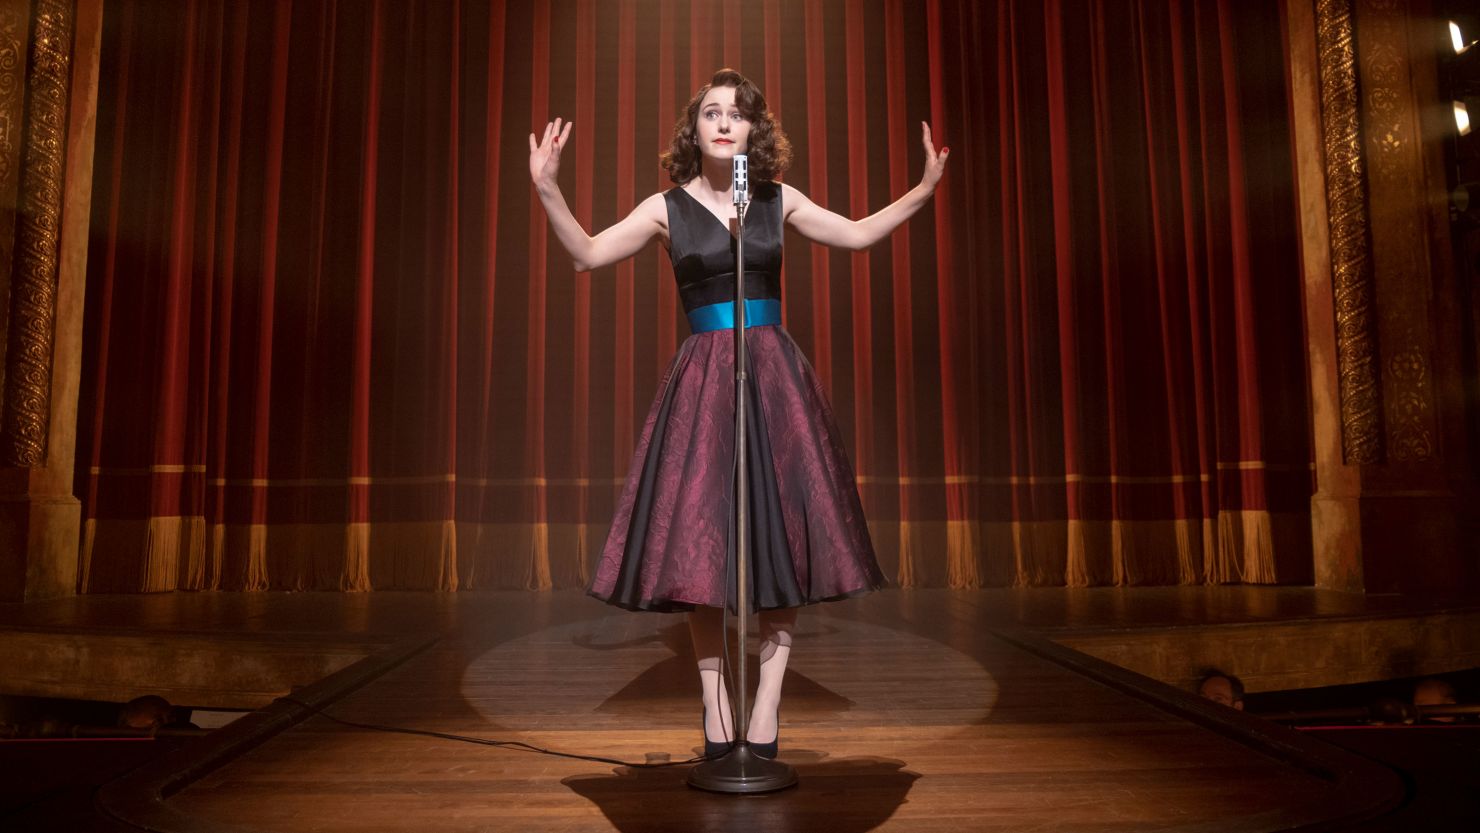 Rachel Brosnahan in "The Marvelous Mrs. Maisel," kicking off its final season on Amazon's Prime Video.